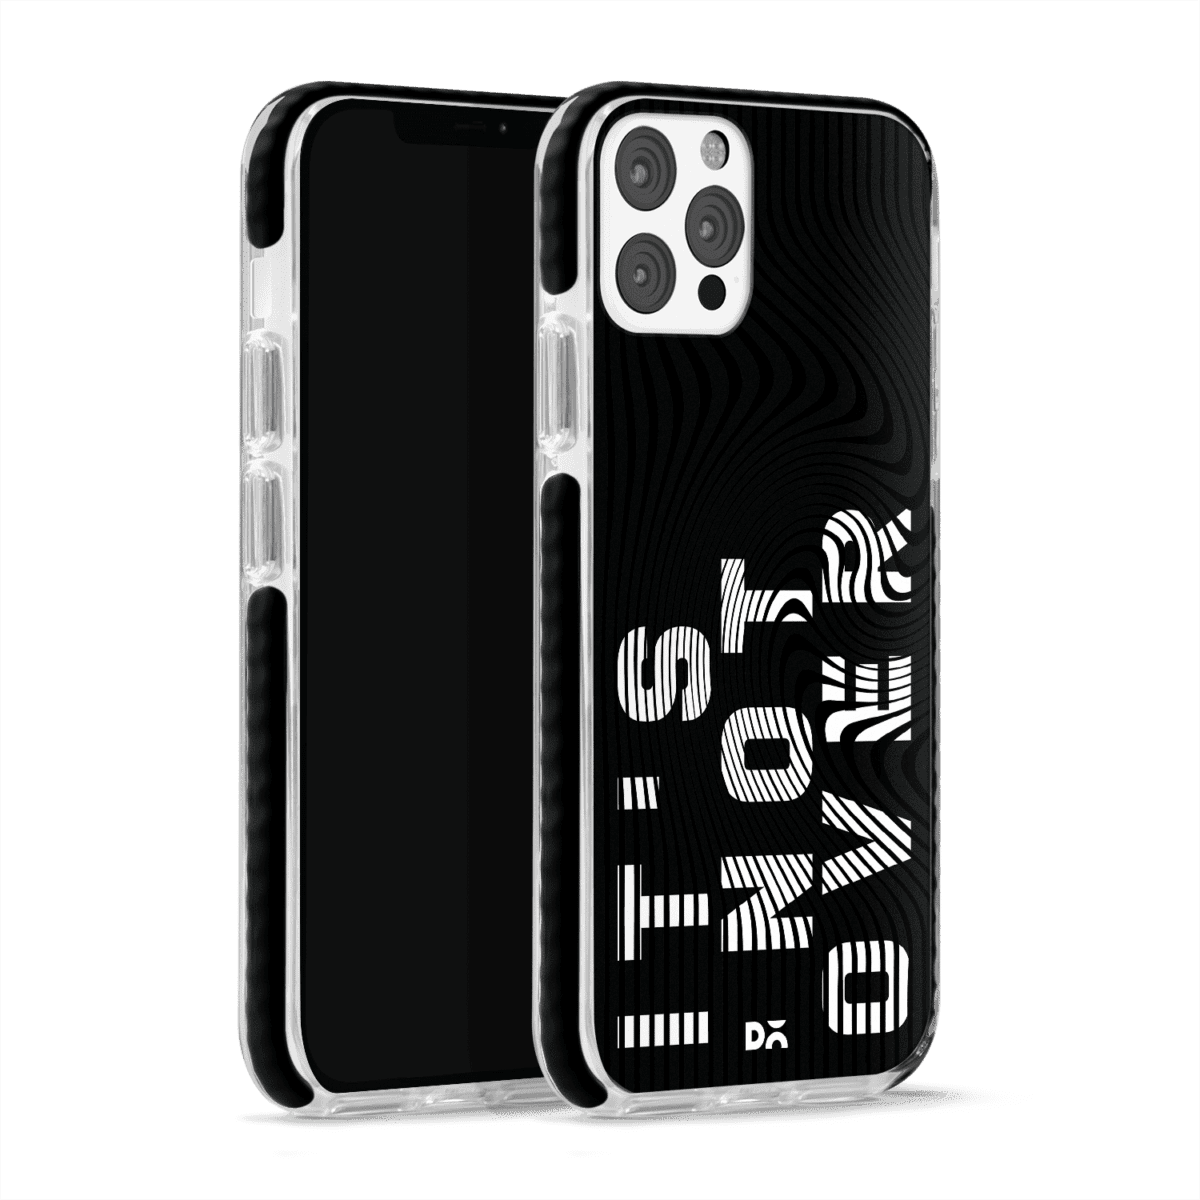 Its Not Over Stride Case Cover for Apple iPhone 12 Pro and Apple iPhone 12 Pro Max with great design and shock proof | Klippik | Online Shopping | Kuwait UAE Saudi